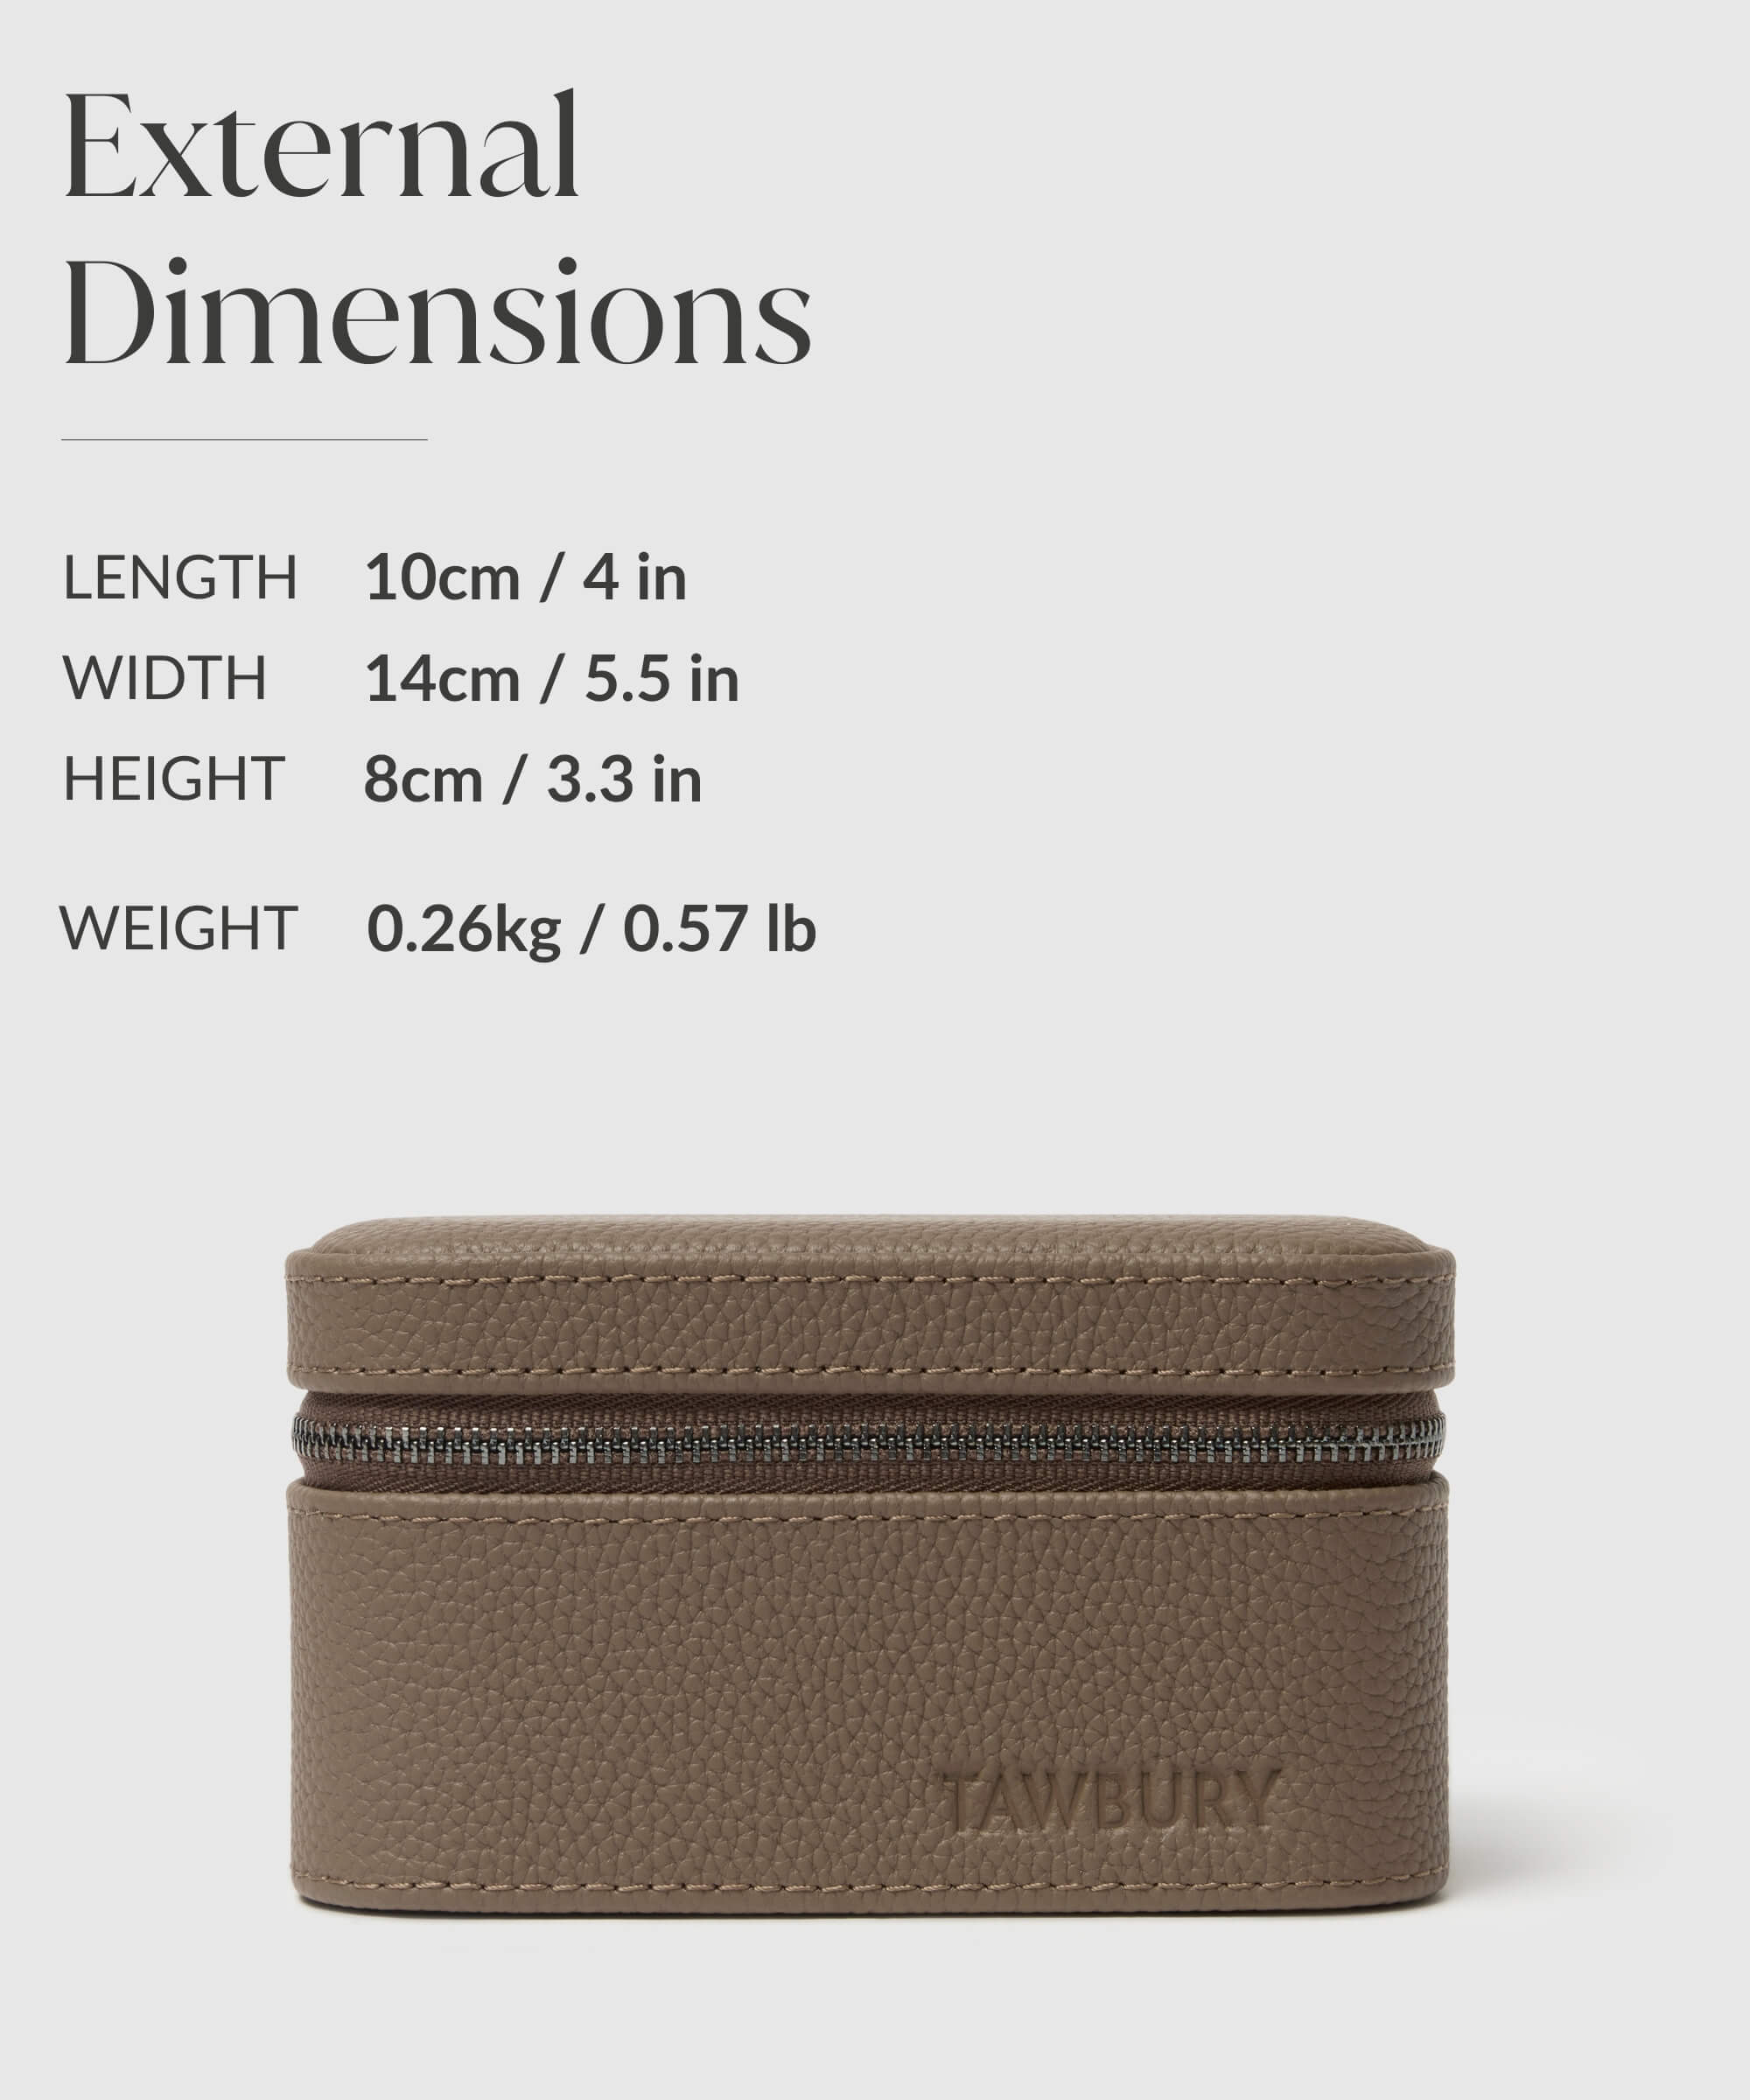 This Fraser 2 Watch Travel Case - Taupe offers protection and a compact design for your TAWBURY watch travel case.